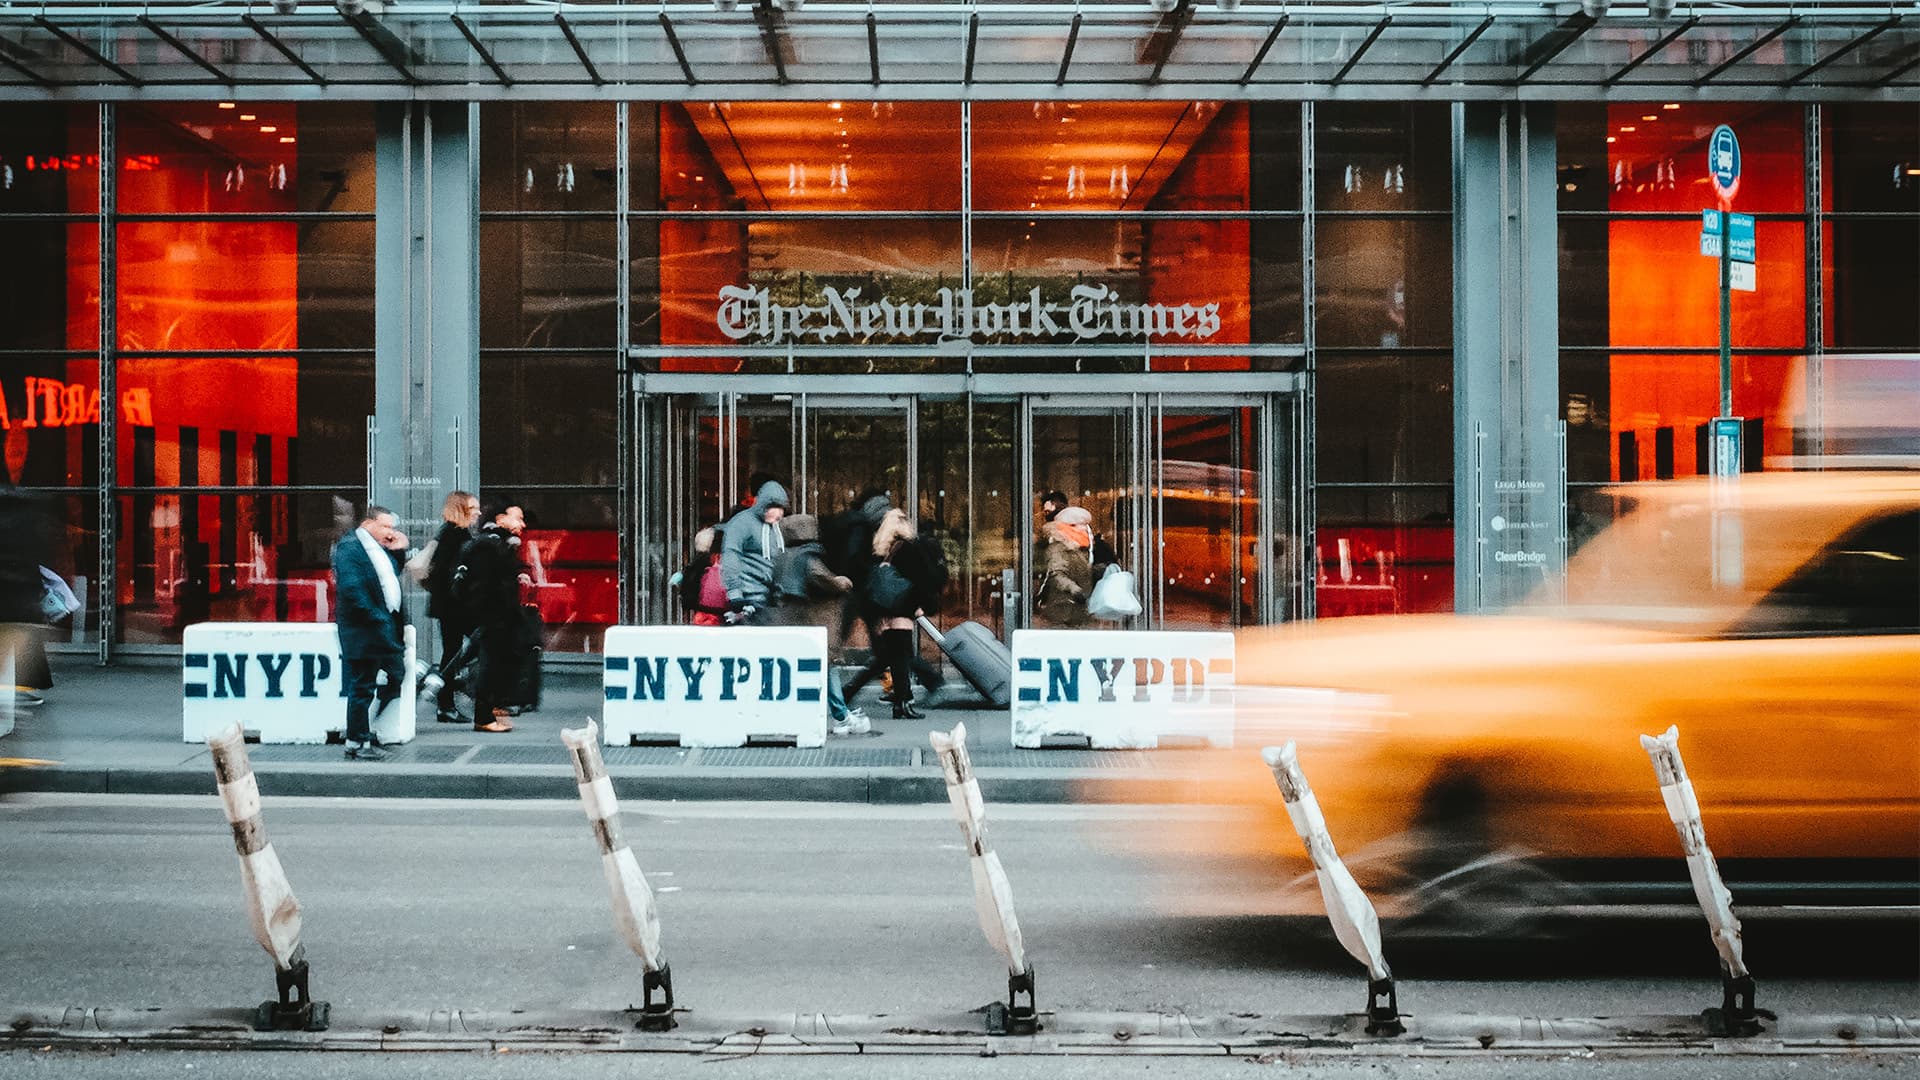 The new york times  digital feature Image 1